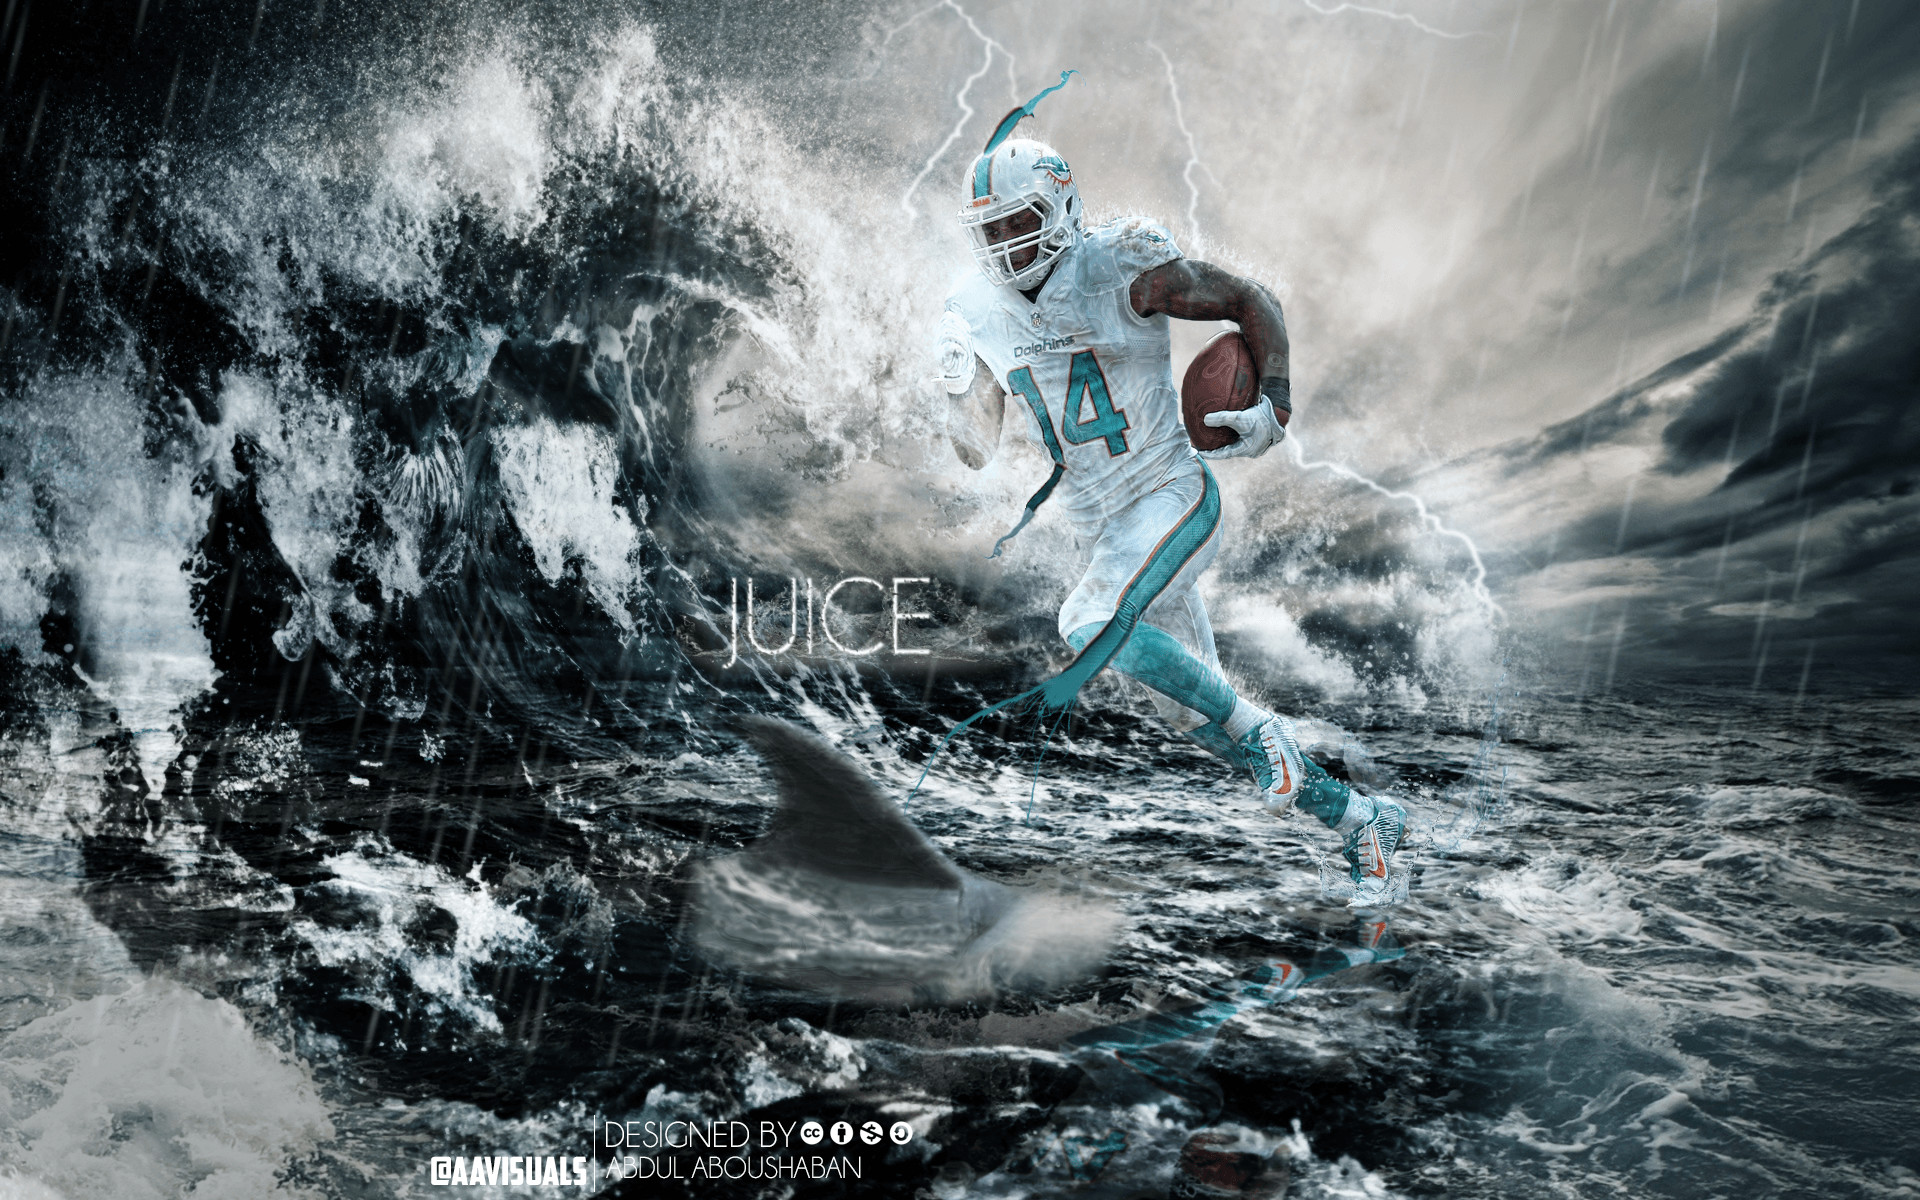 jarvis landry wallpaper,extreme sport,wave,recreation,photography,graphic design